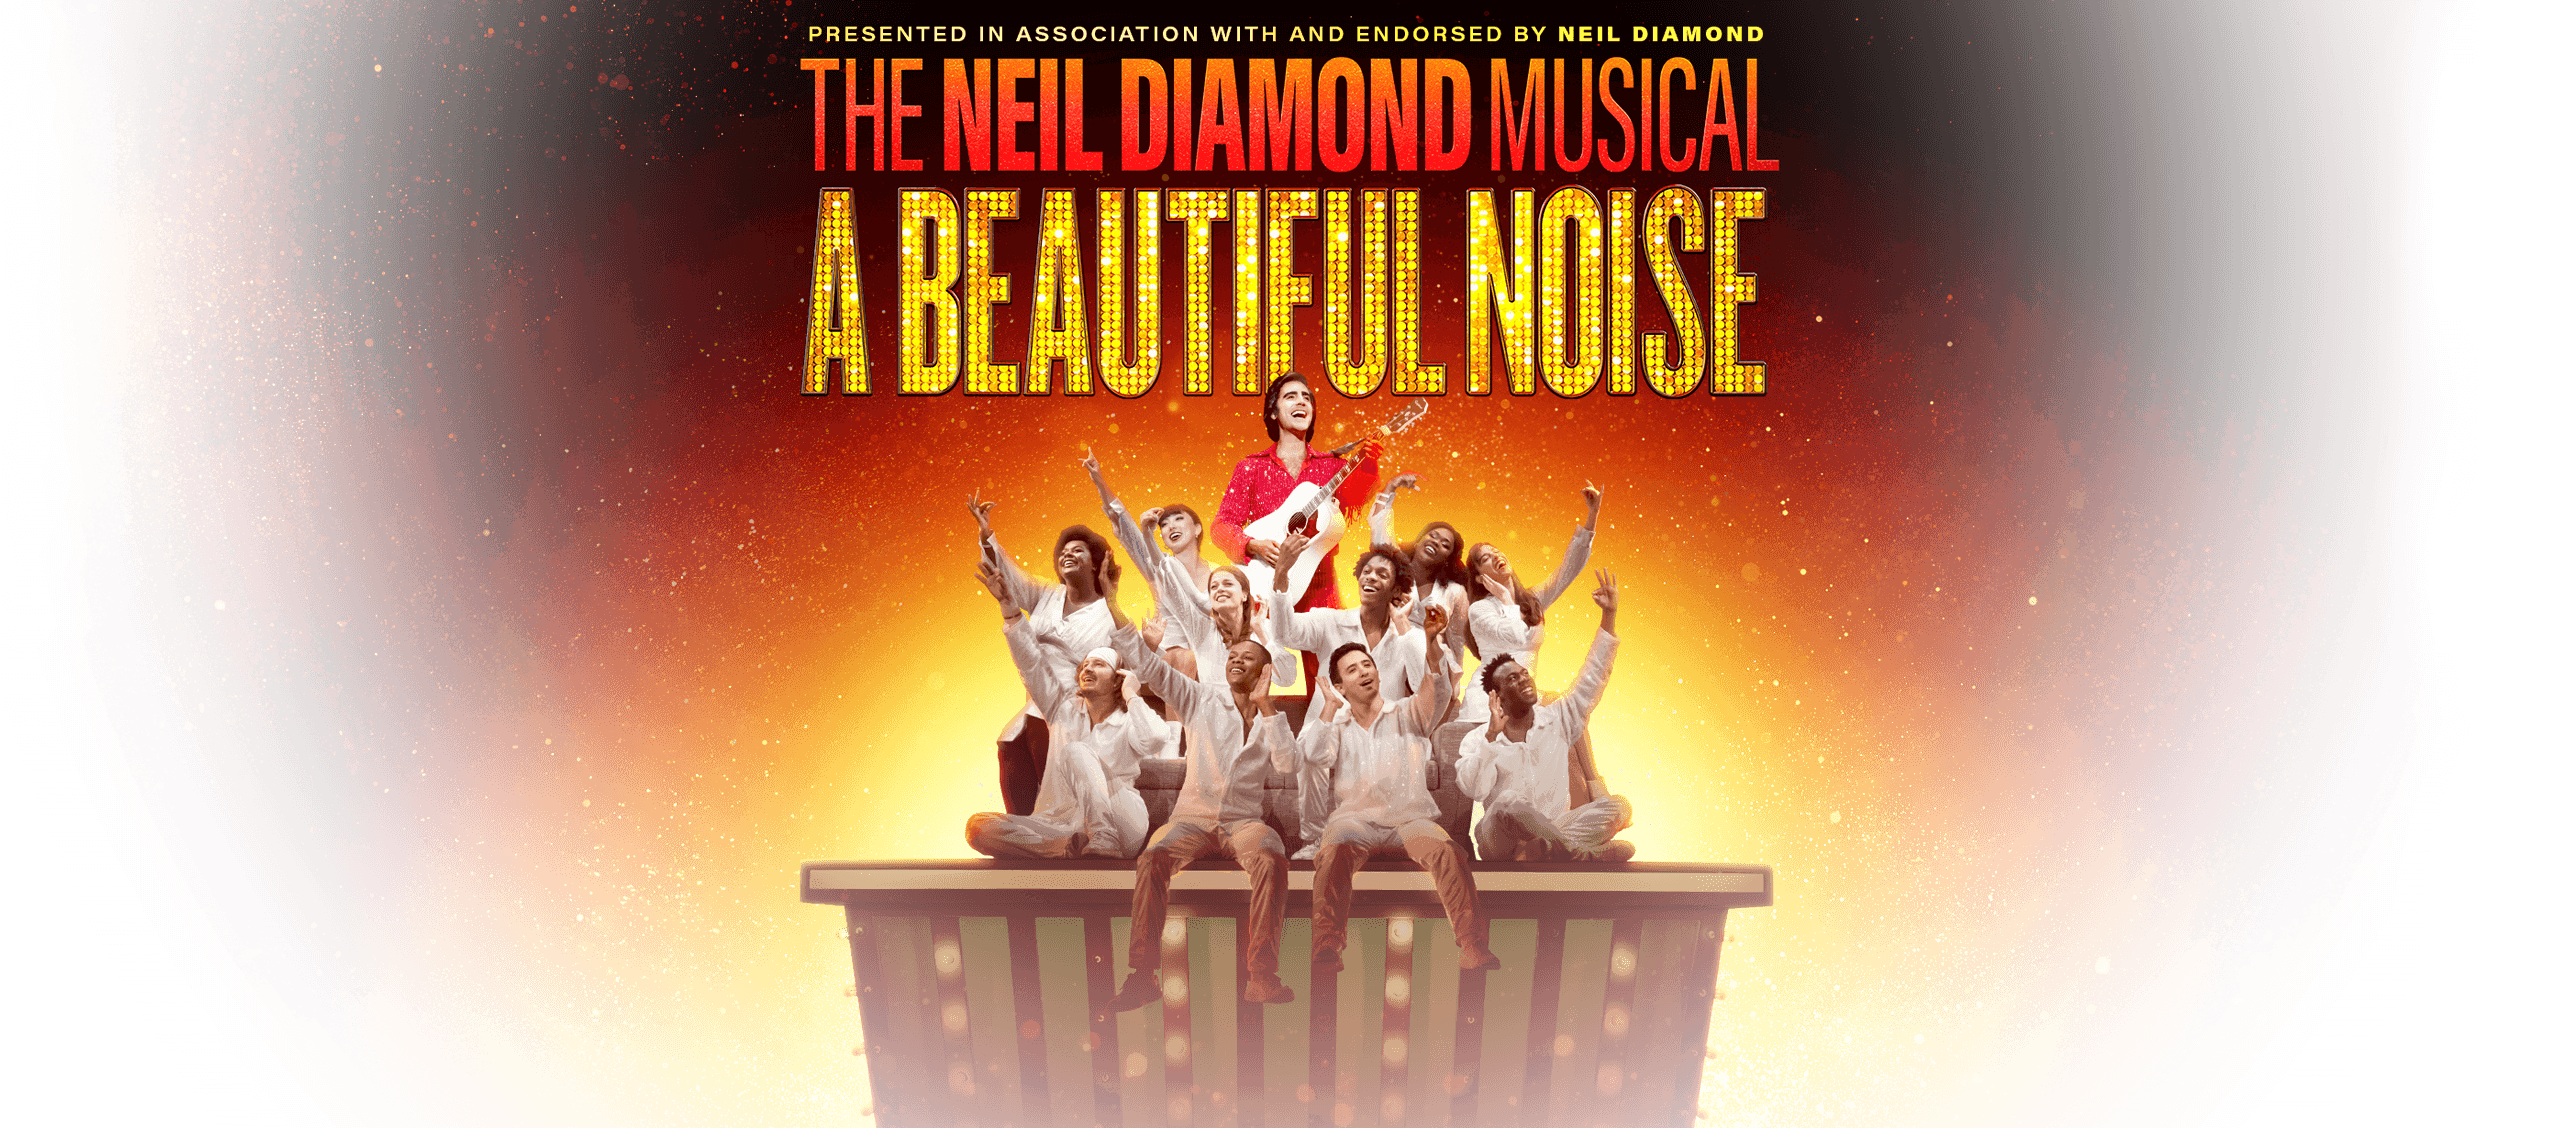 Show Art with words on it: Presented in Association with and endorsed by Neil Diamond: The Neil Diamond Musical A Beautiful Noise. Graphic art shows Neil Diamond playing his guitar with surrounding cast members singing along with him.